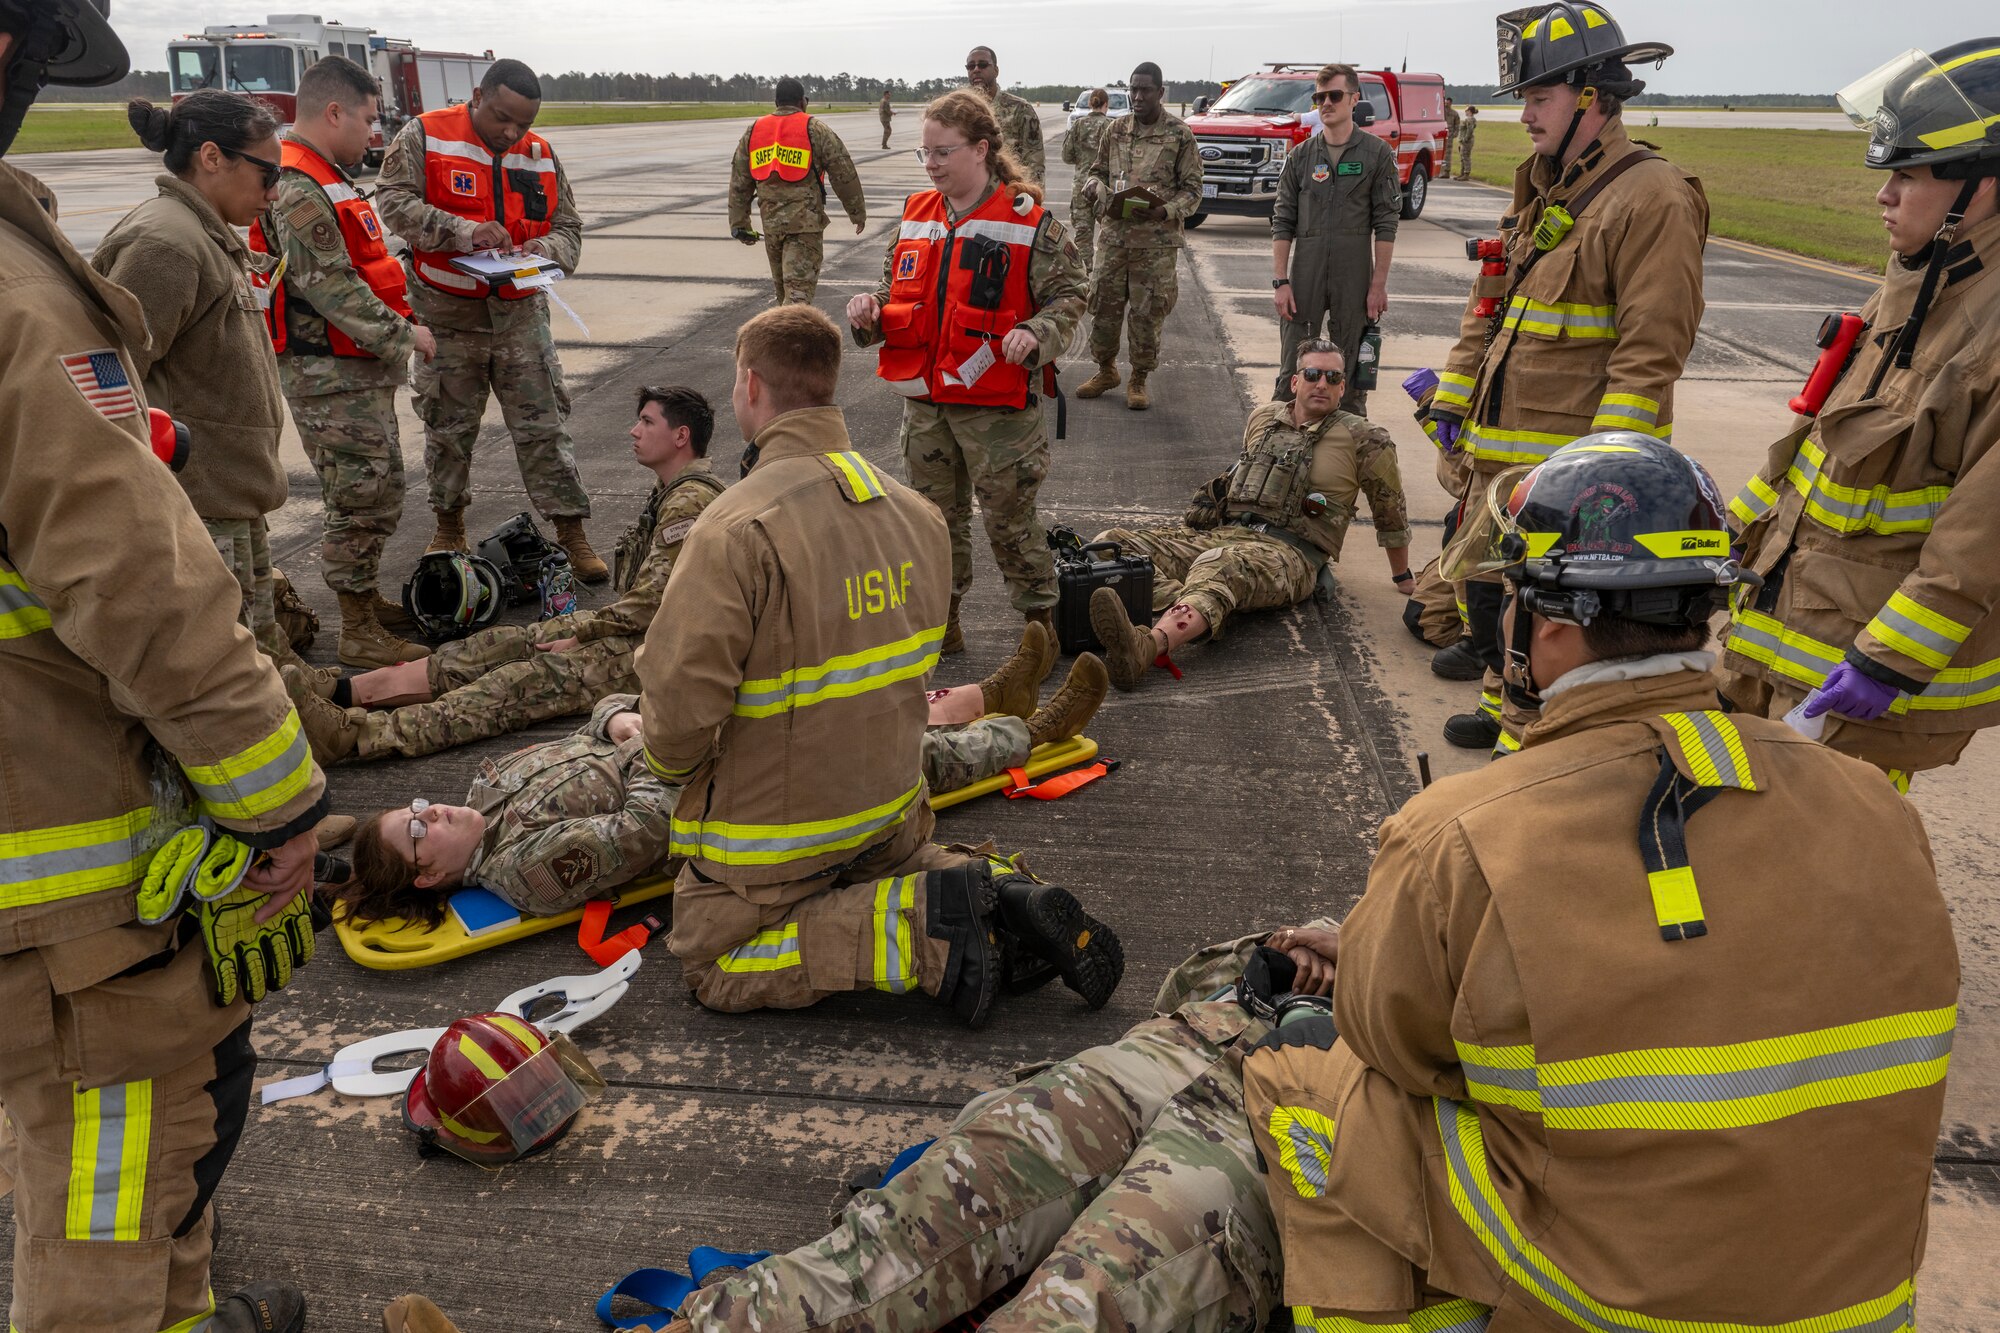 U.S. Air Force Airmen assigned to the 23rd Wing participate in an aircraft accident response exercise at Moody Air Force Base, Georgia, March 26, 2024. Subject matter experts from various career fields provided desired learning objectives to the 23rd Wing Inspector General office. The IG then built the exercise around these objectives to test each agency's ability to integrate. (U.S. Air Force photo by Senior Airman Deanna Muir)